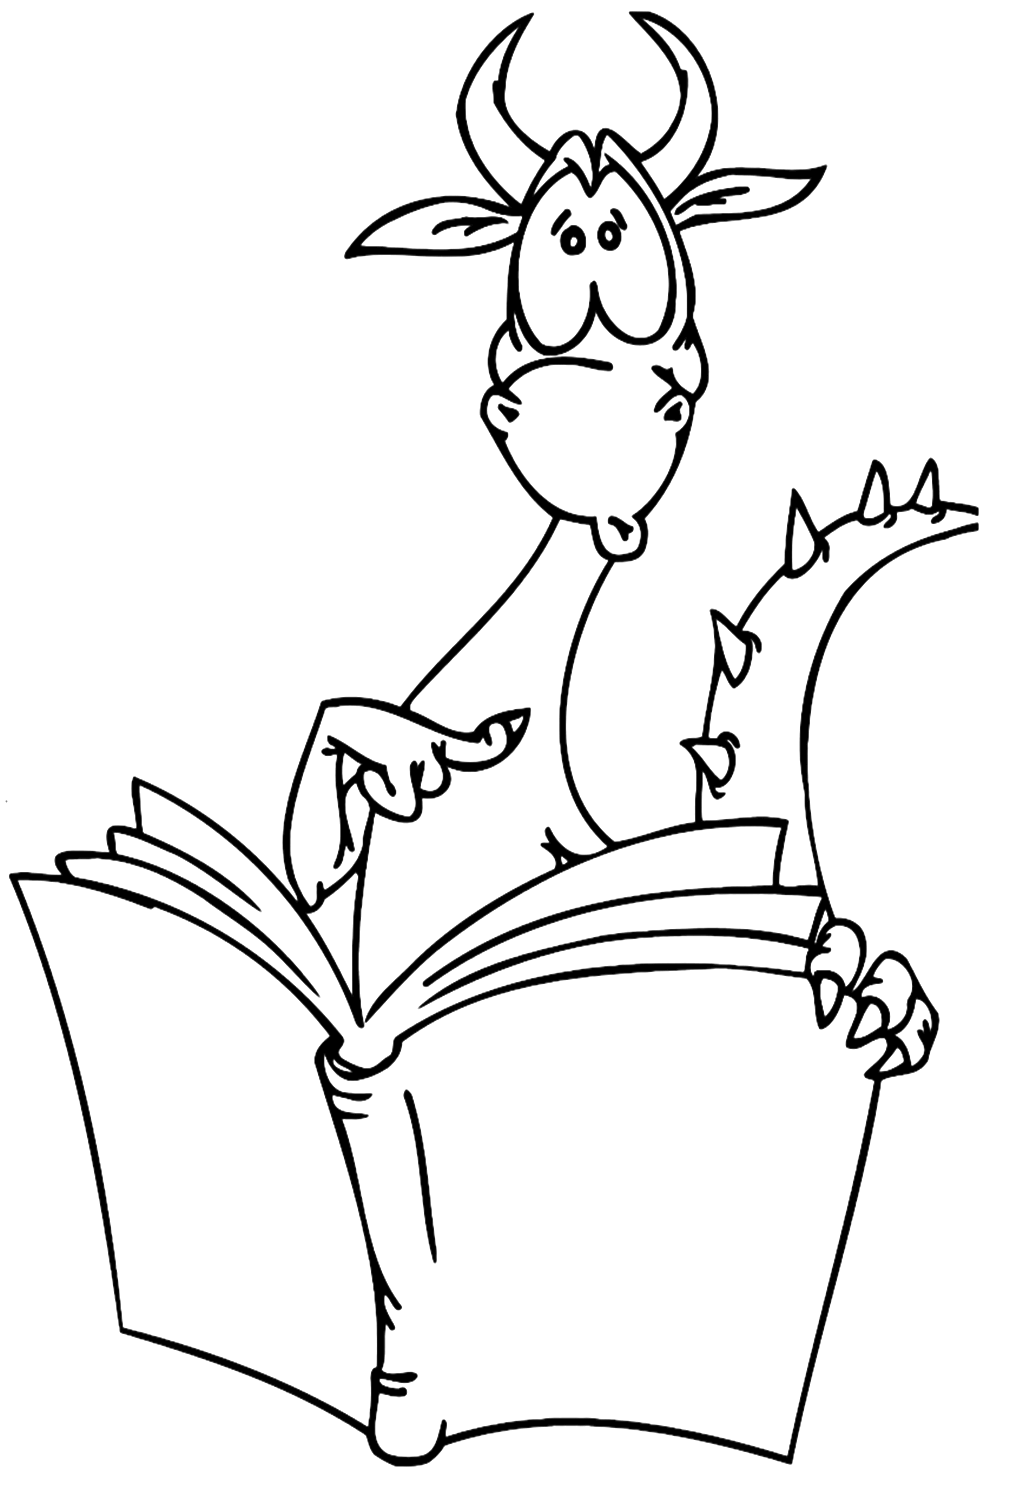 Modest Dragon With A Book Coloring Pages